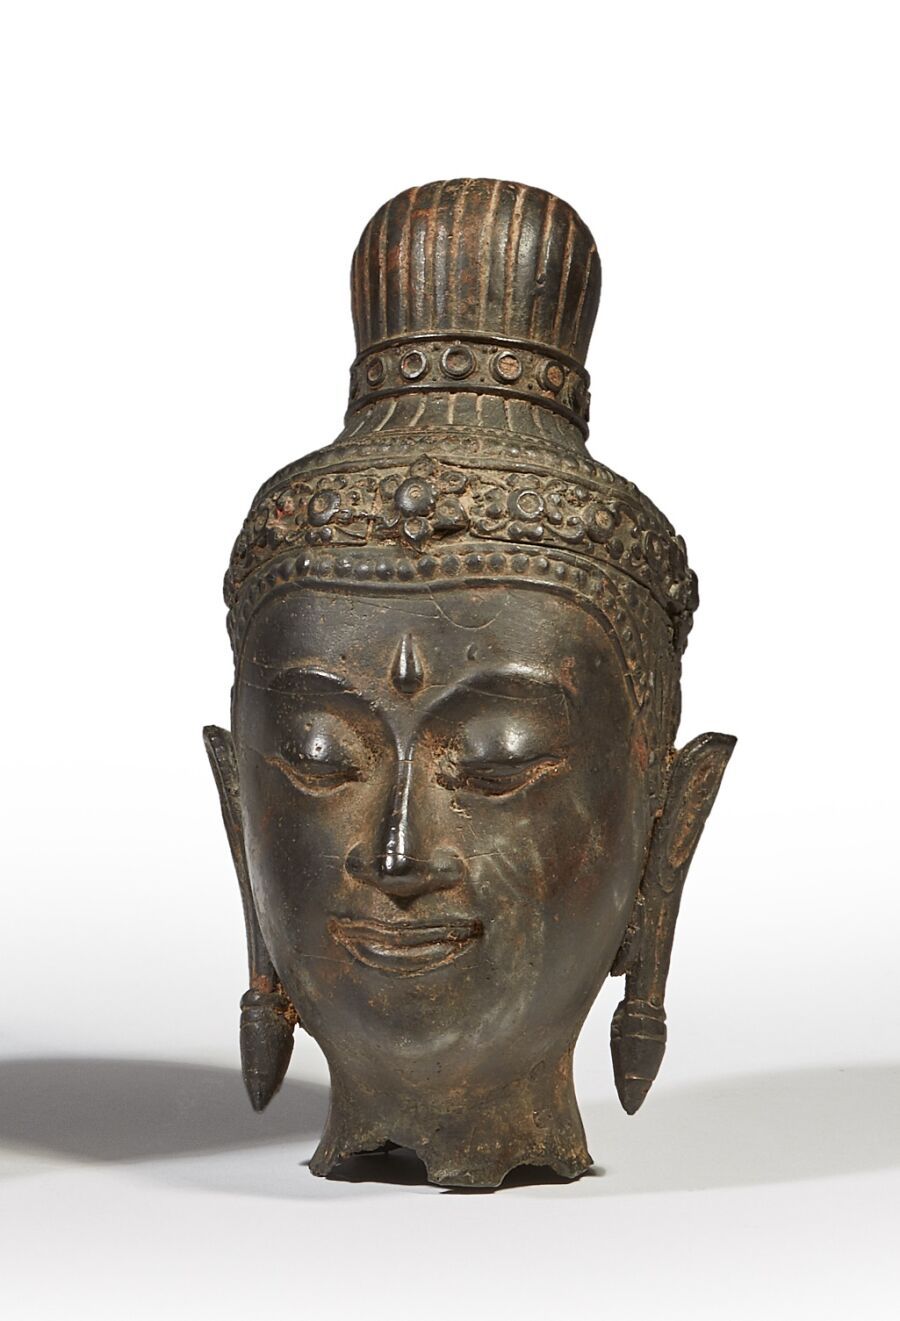 Null THAILAND - About 1900
Head of Buddha in bronze, the eyes half closed, the h&hellip;